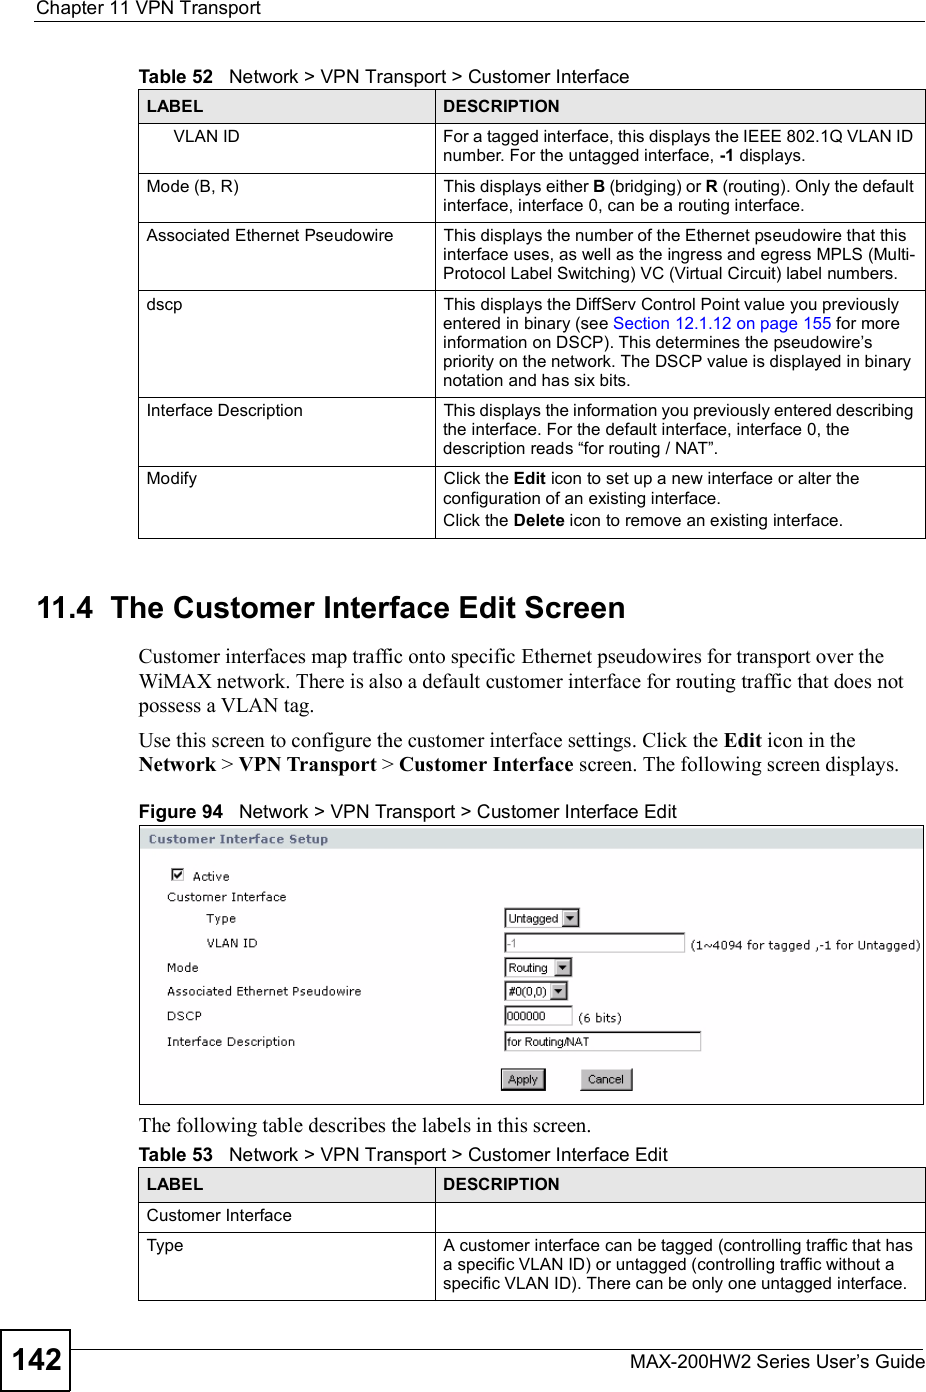 Chapter 11VPN TransportMAX-200HW2 Series User s Guide14211.4  The Customer Interface Edit ScreenCustomer interfaces map traffic onto specific Ethernet pseudowires for transport over the WiMAX network. There is also a default customer interface for routing traffic that does not possess a VLAN tag.Use this screen to configure the customer interface settings. Click the Edit icon in the Network &gt; VPN Transport &gt; Customer Interface screen. The following screen displays.Figure 94   Network &gt; VPN Transport &gt; Customer Interface EditThe following table describes the labels in this screen.VLAN IDFor a tagged interface, this displays the IEEE 802.1Q VLAN ID number. For the untagged interface, -1 displays.Mode (B, R)This displays either B (bridging) or R (routing). Only the default interface, interface 0, can be a routing interface.Associated Ethernet Pseudowire This displays the number of the Ethernet pseudowire that this interface uses, as well as the ingress and egress MPLS (Multi-Protocol Label Switching) VC (Virtual Circuit) label numbers.dscpThis displays the DiffServ Control Point value you previously entered in binary (see Section 12.1.12 on page 155 for more information on DSCP). This determines the pseudowire s priority on the network. The DSCP value is displayed in binary notation and has six bits.Interface DescriptionThis displays the information you previously entered describing the interface. For the default interface, interface 0, the description reads !for routing / NAT&quot;.ModifyClick the Edit icon to set up a new interface or alter the configuration of an existing interface.Click the Delete icon to remove an existing interface. Table 52   Network &gt; VPN Transport &gt; Customer InterfaceLABEL DESCRIPTIONTable 53   Network &gt; VPN Transport &gt; Customer Interface EditLABEL DESCRIPTIONCustomer InterfaceTypeA customer interface can be tagged (controlling traffic that has a specific VLAN ID) or untagged (controlling traffic without a specific VLAN ID). There can be only one untagged interface.